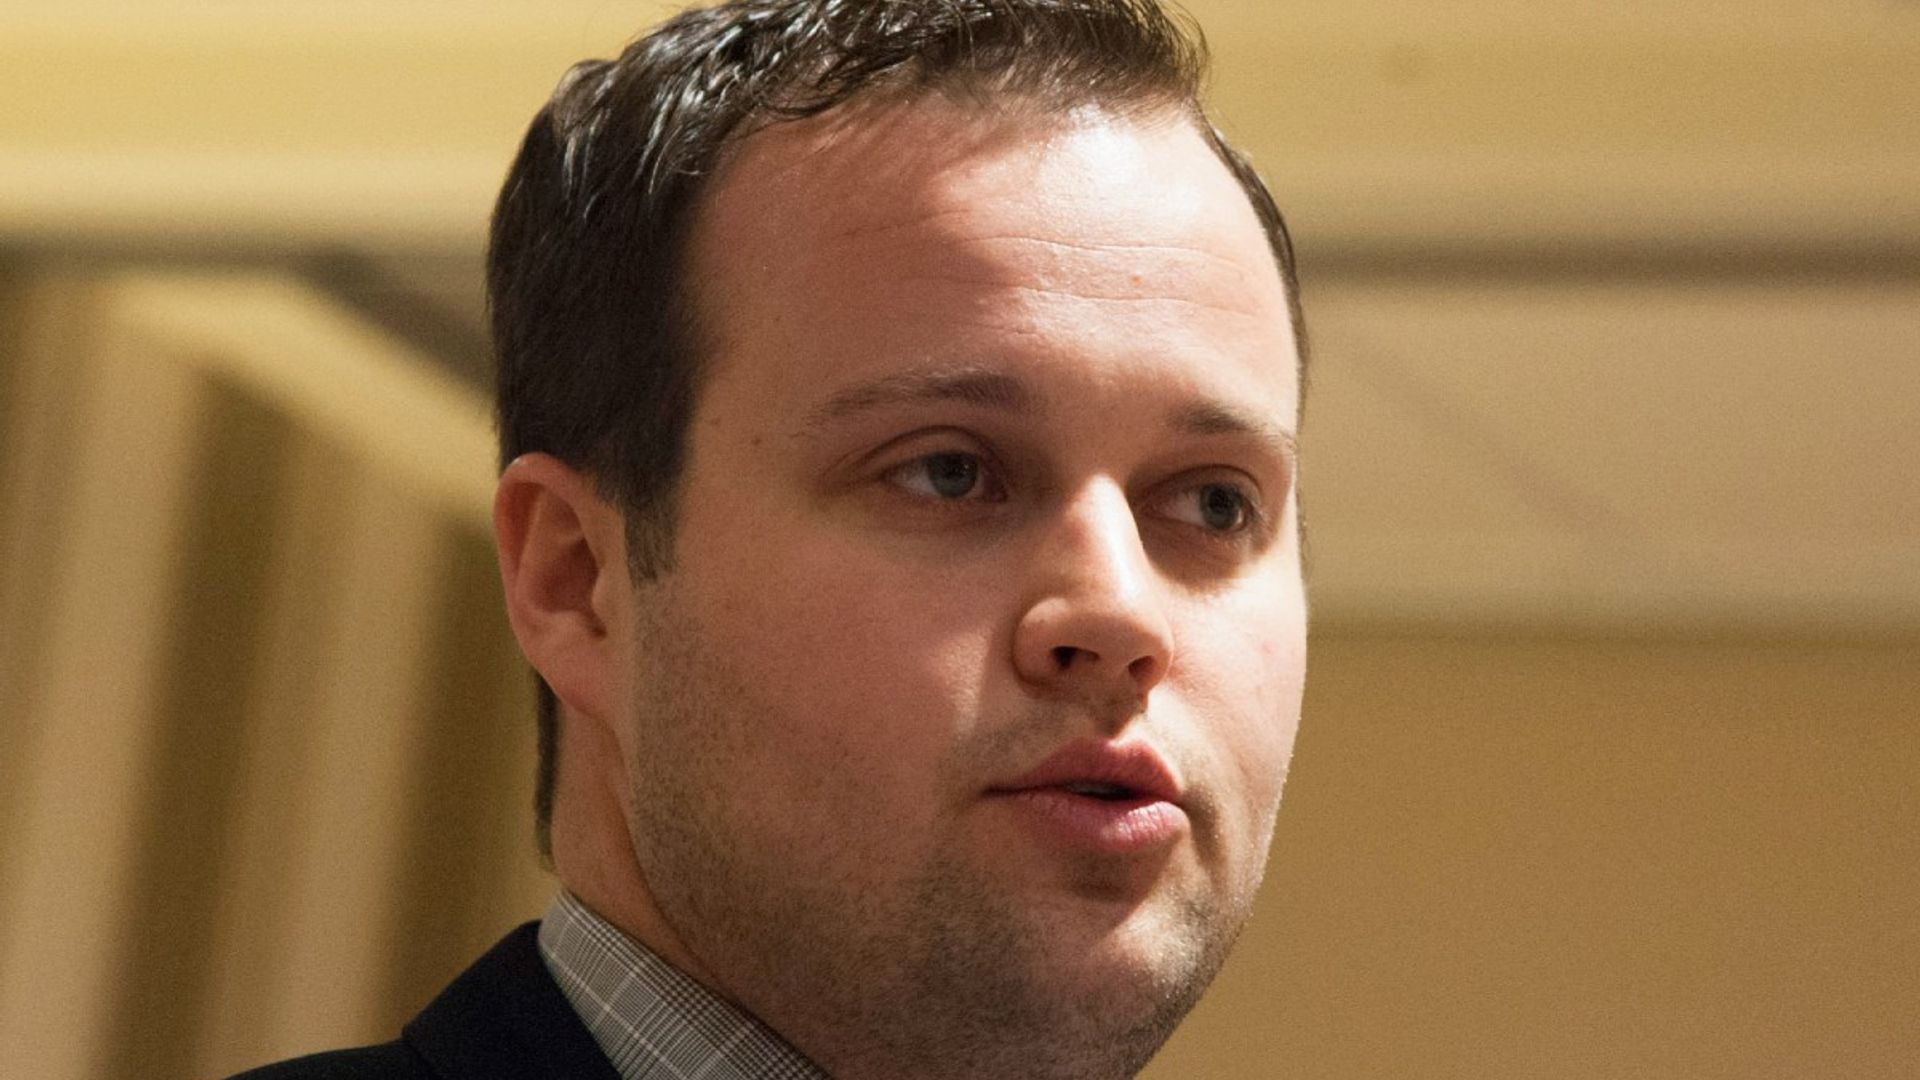 Josh Duggar sentenced to more than 12 years in prison after guilty verdict in shocking court case